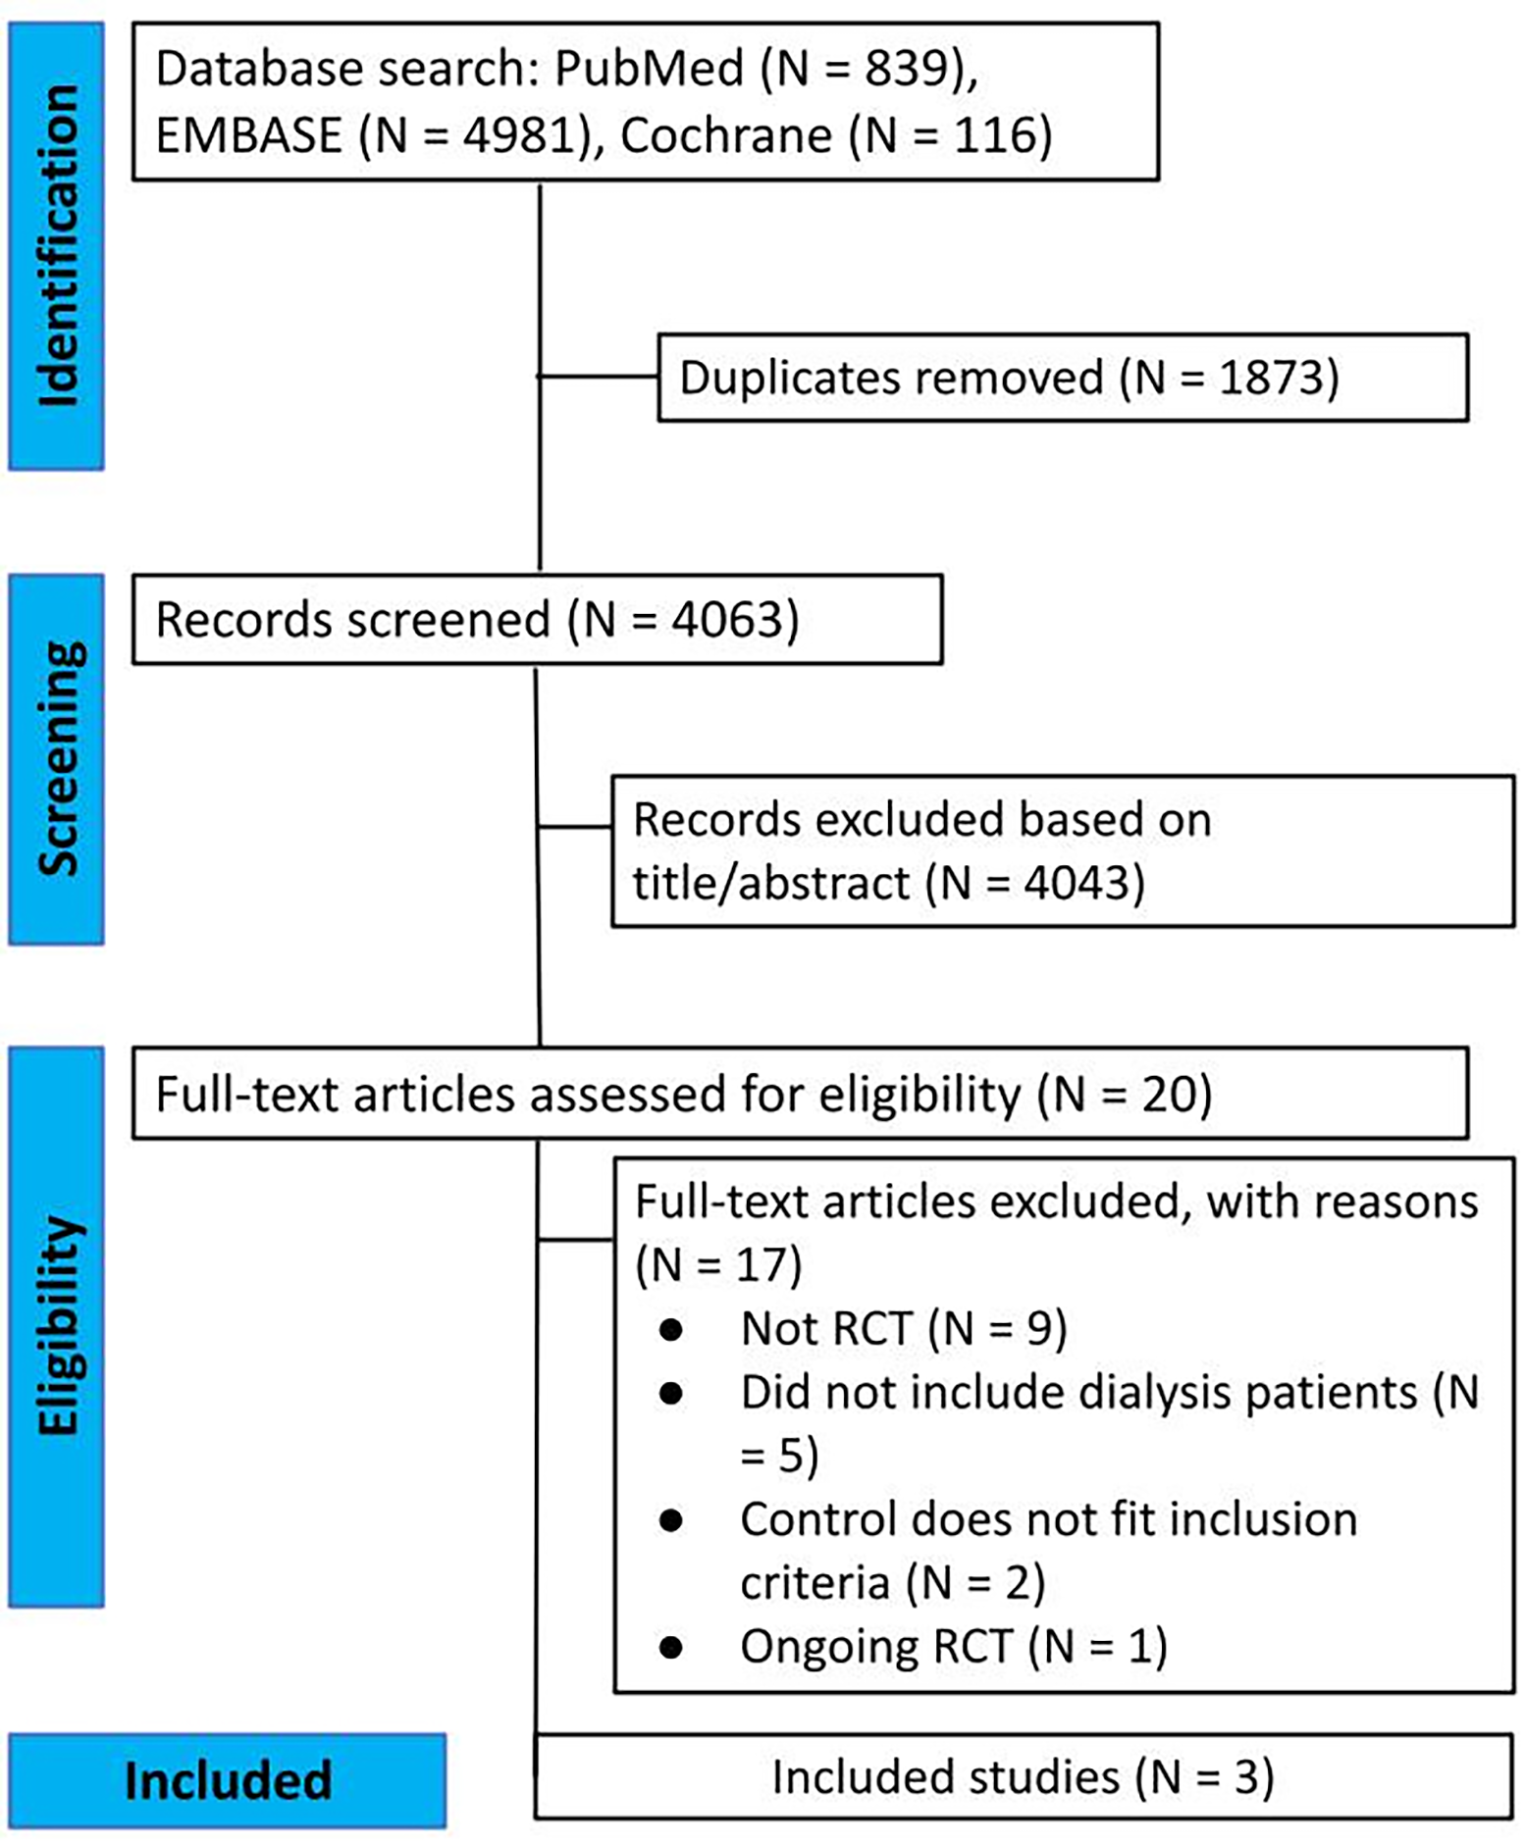 Direct oral anticoagulants versus vitamin K antagonists in patients with atrial fibrillation and stage 5 chronic kidney disease under dialysis: A systematic review and meta-analysis of randomized controlled trials